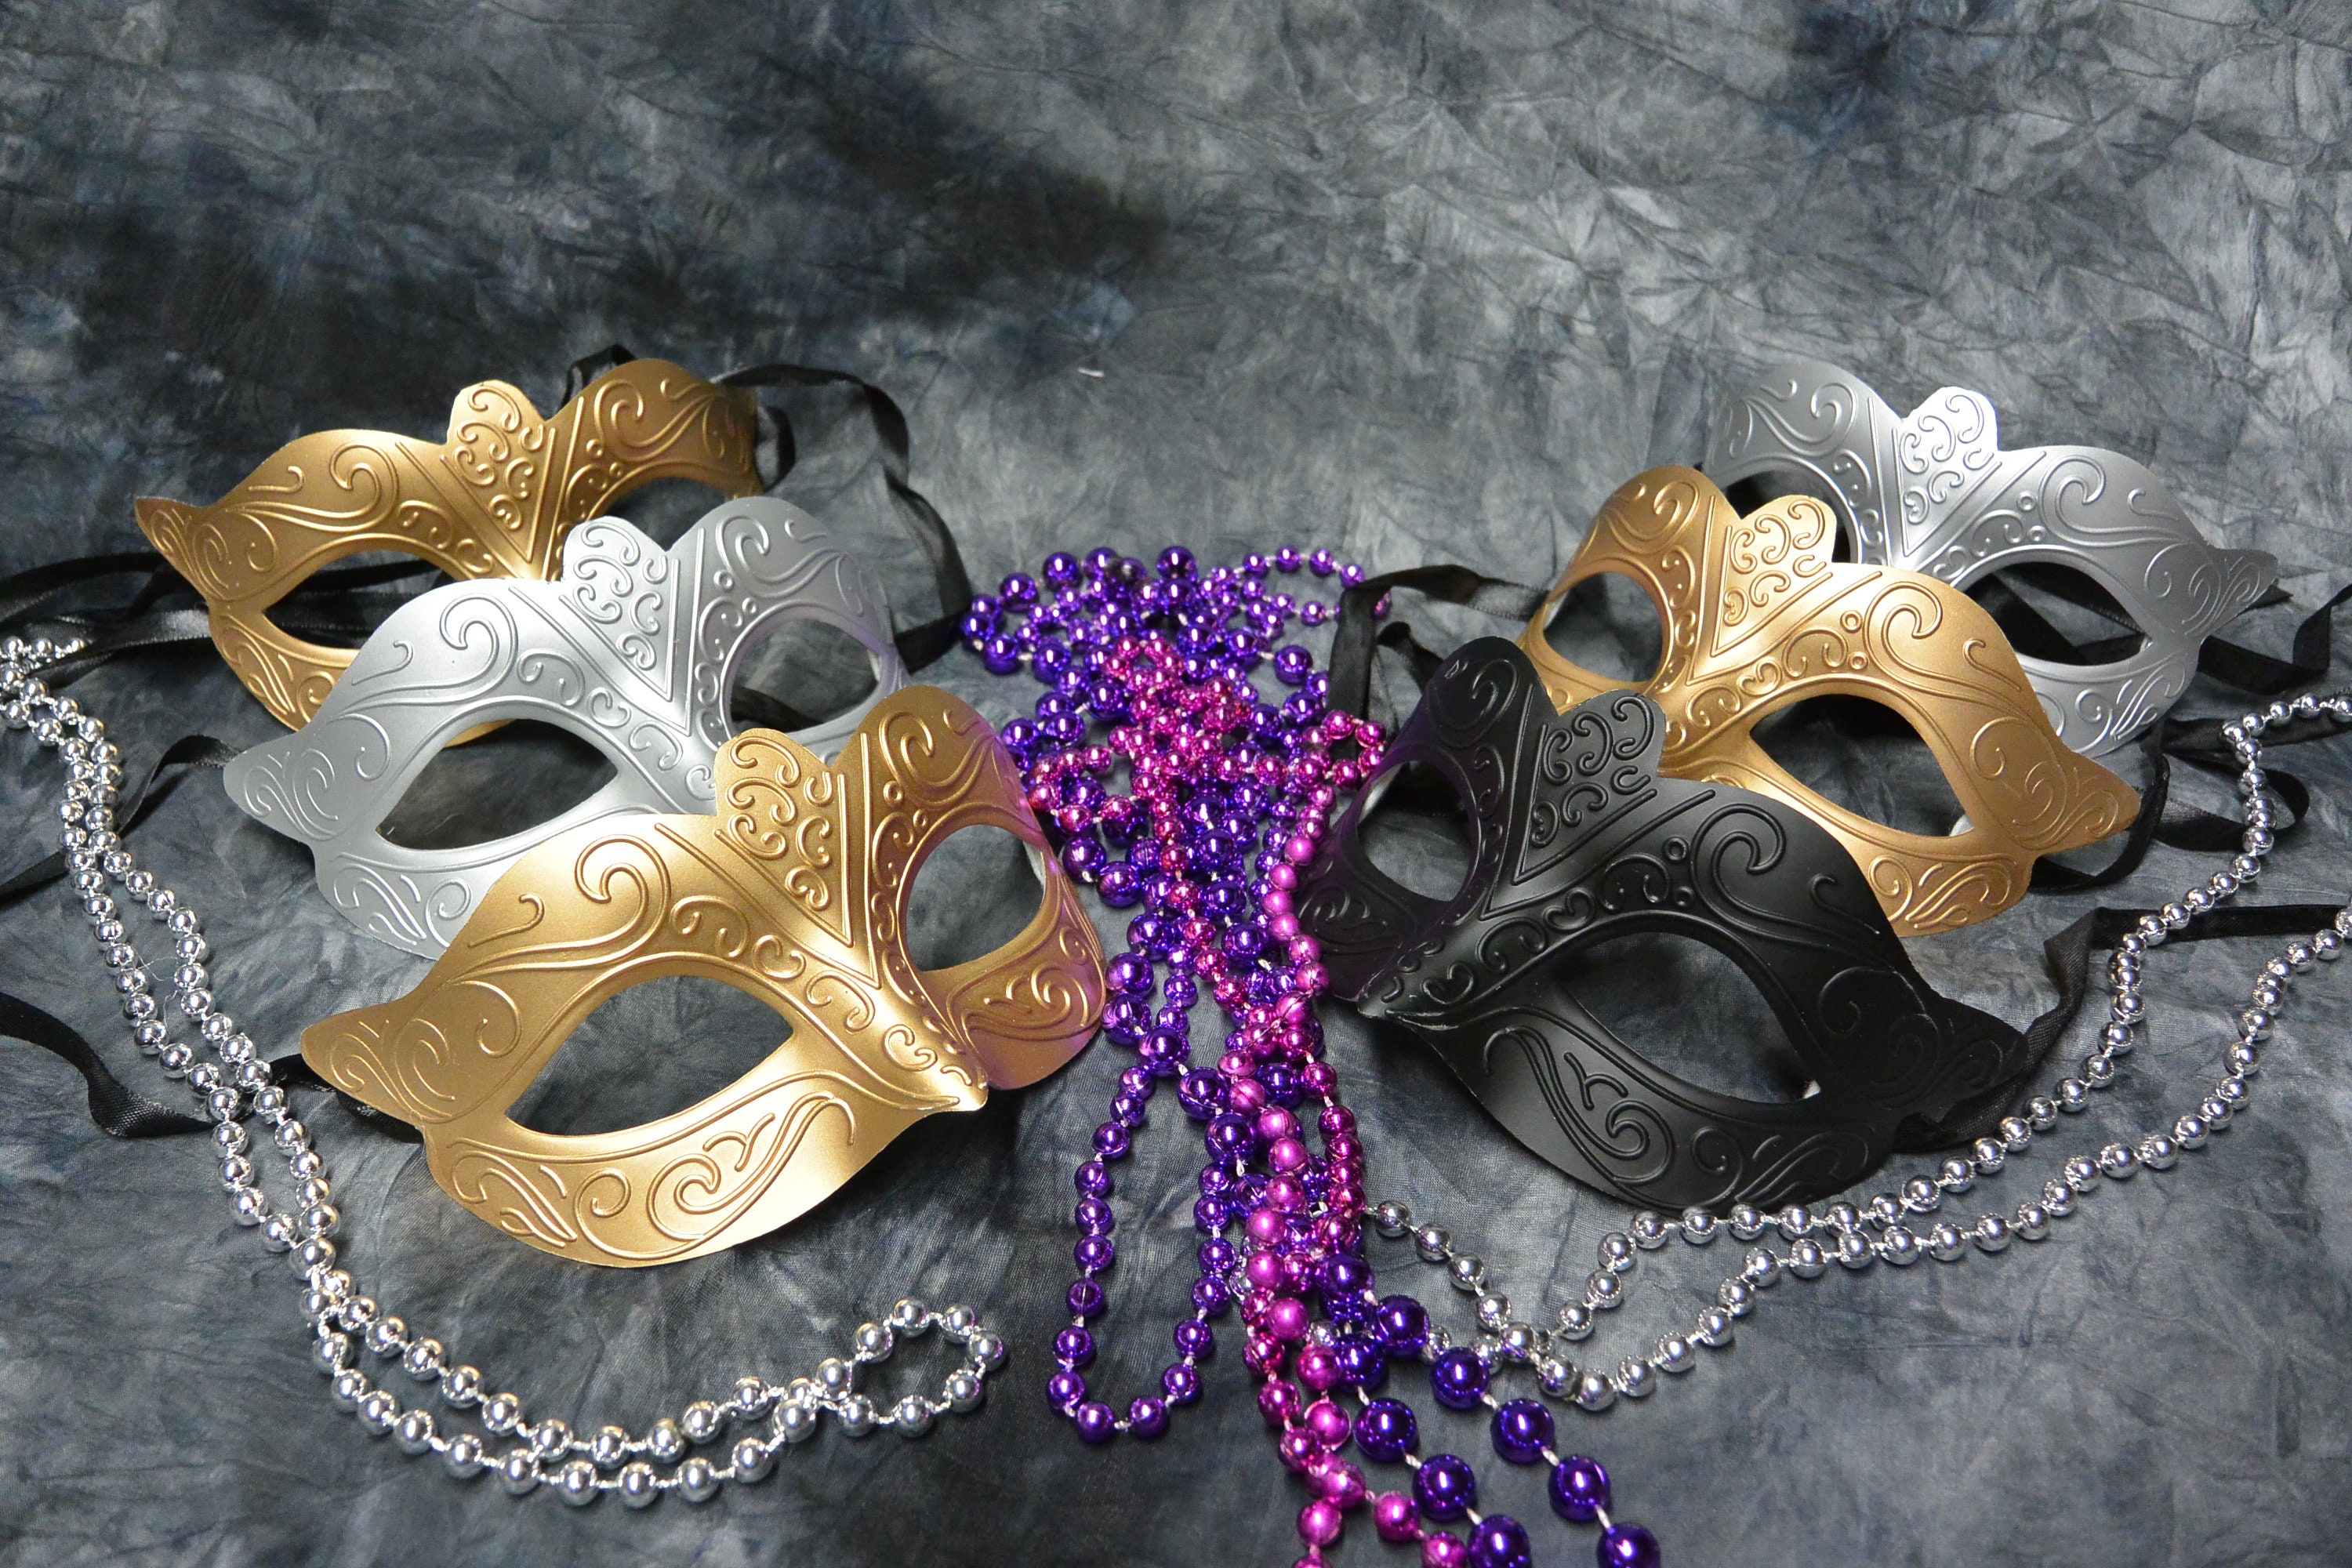 Paper Mache Masks for Mardi Gras Masquerade, 10 Blank Designs for Decorating  (16 Pack) 